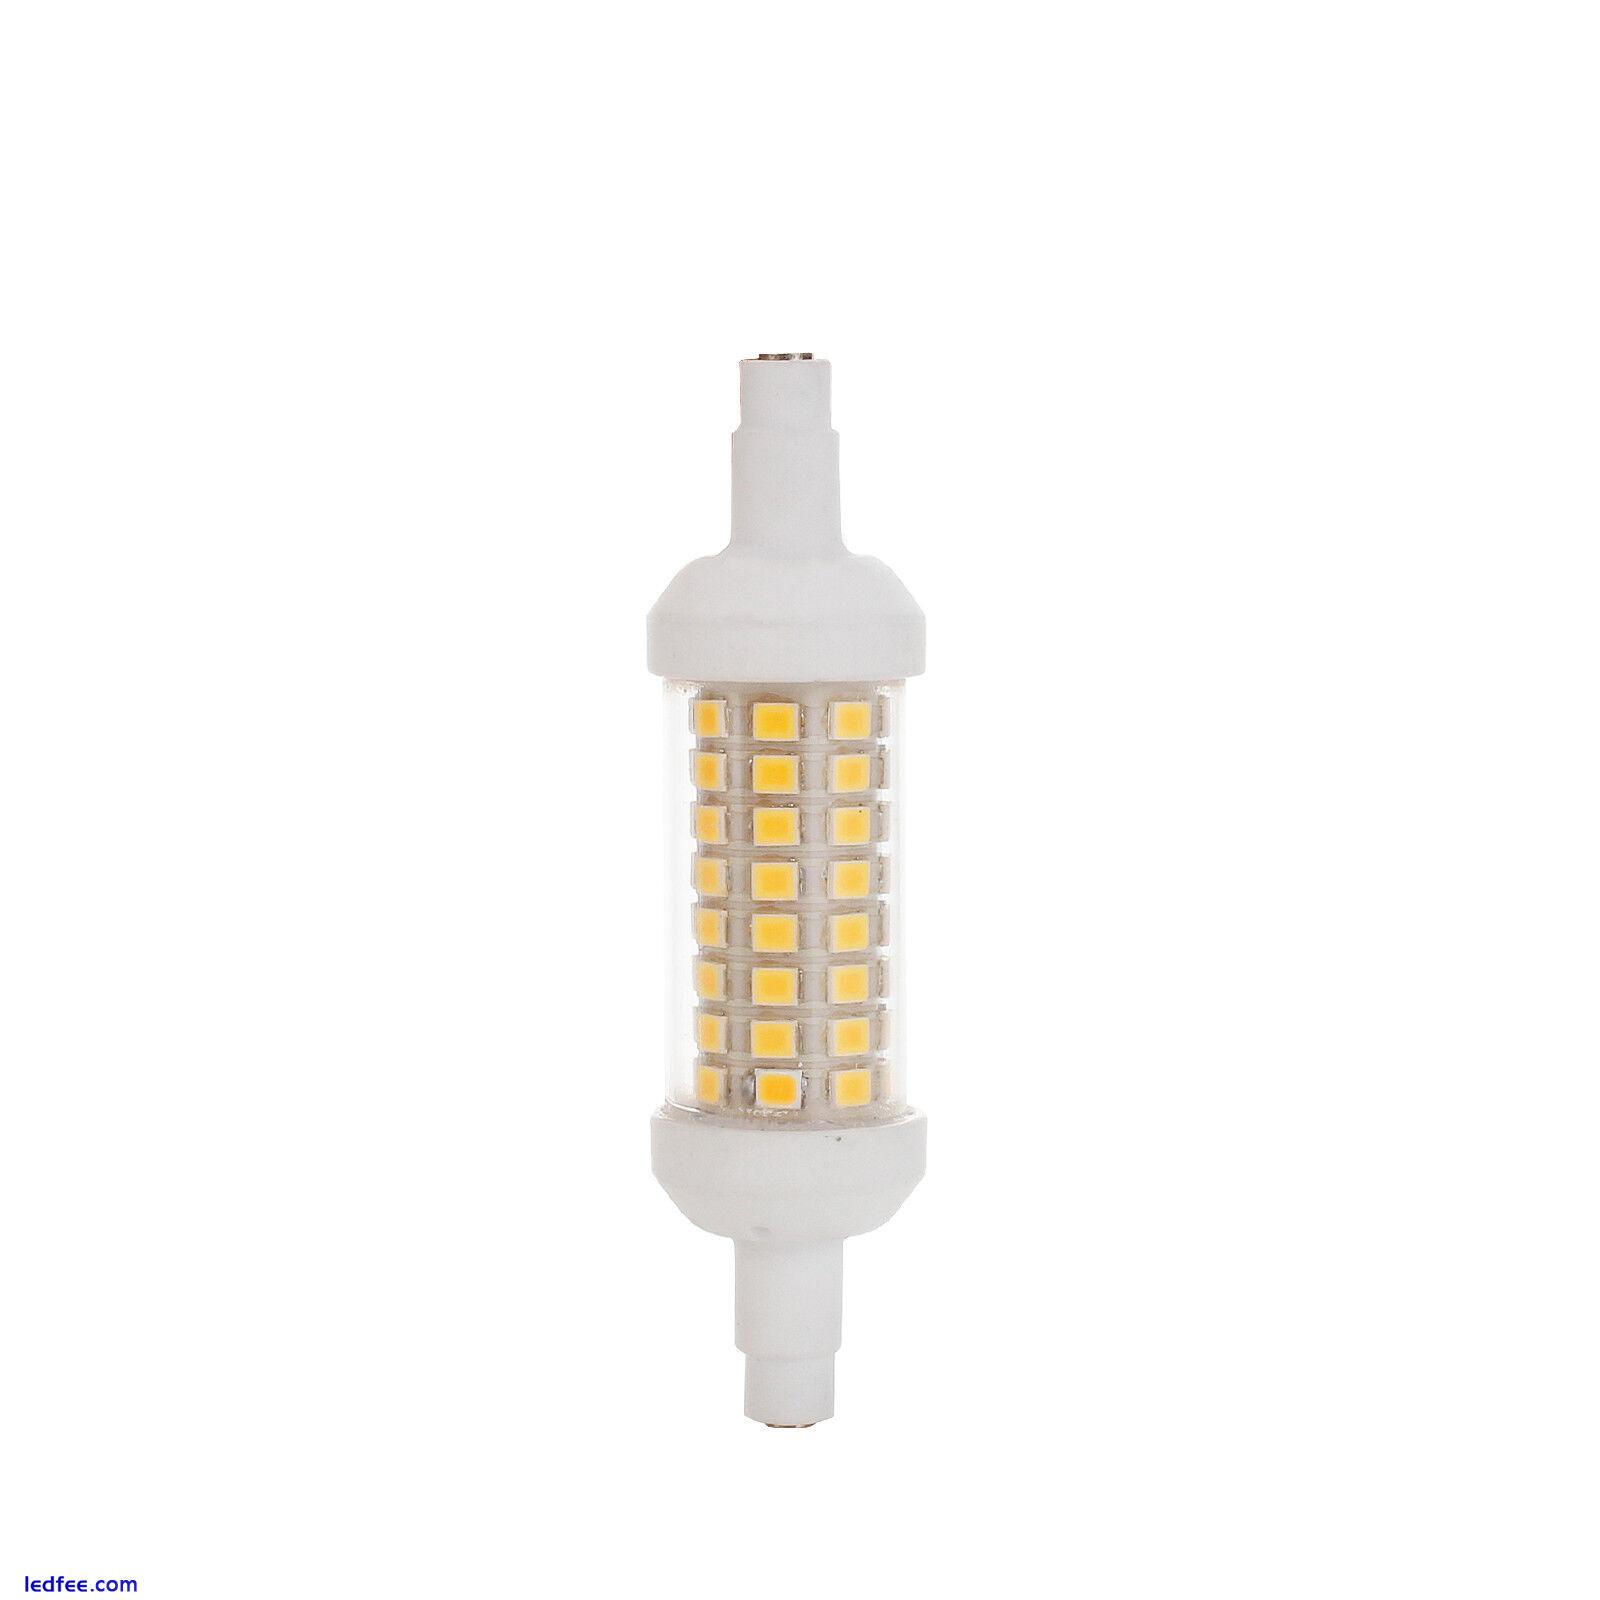 Dimmable R7s 10W 15W 20W 2835 SMD LED Light Replace Halogen Lamp Floodlight 220V 4 